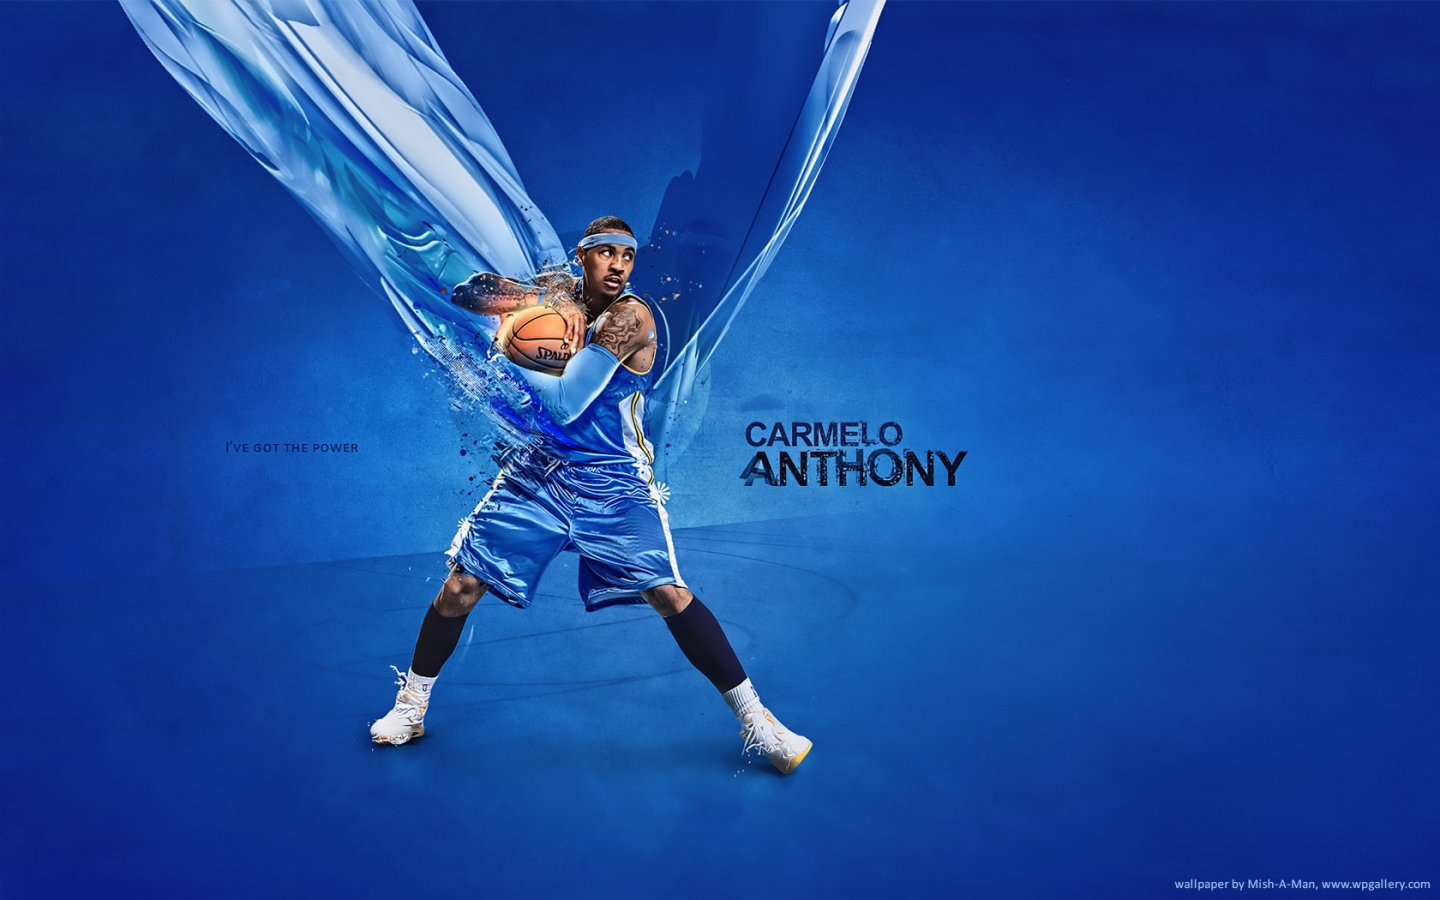 Carmelo Anthony X Widescreen Wallpaper Gallery